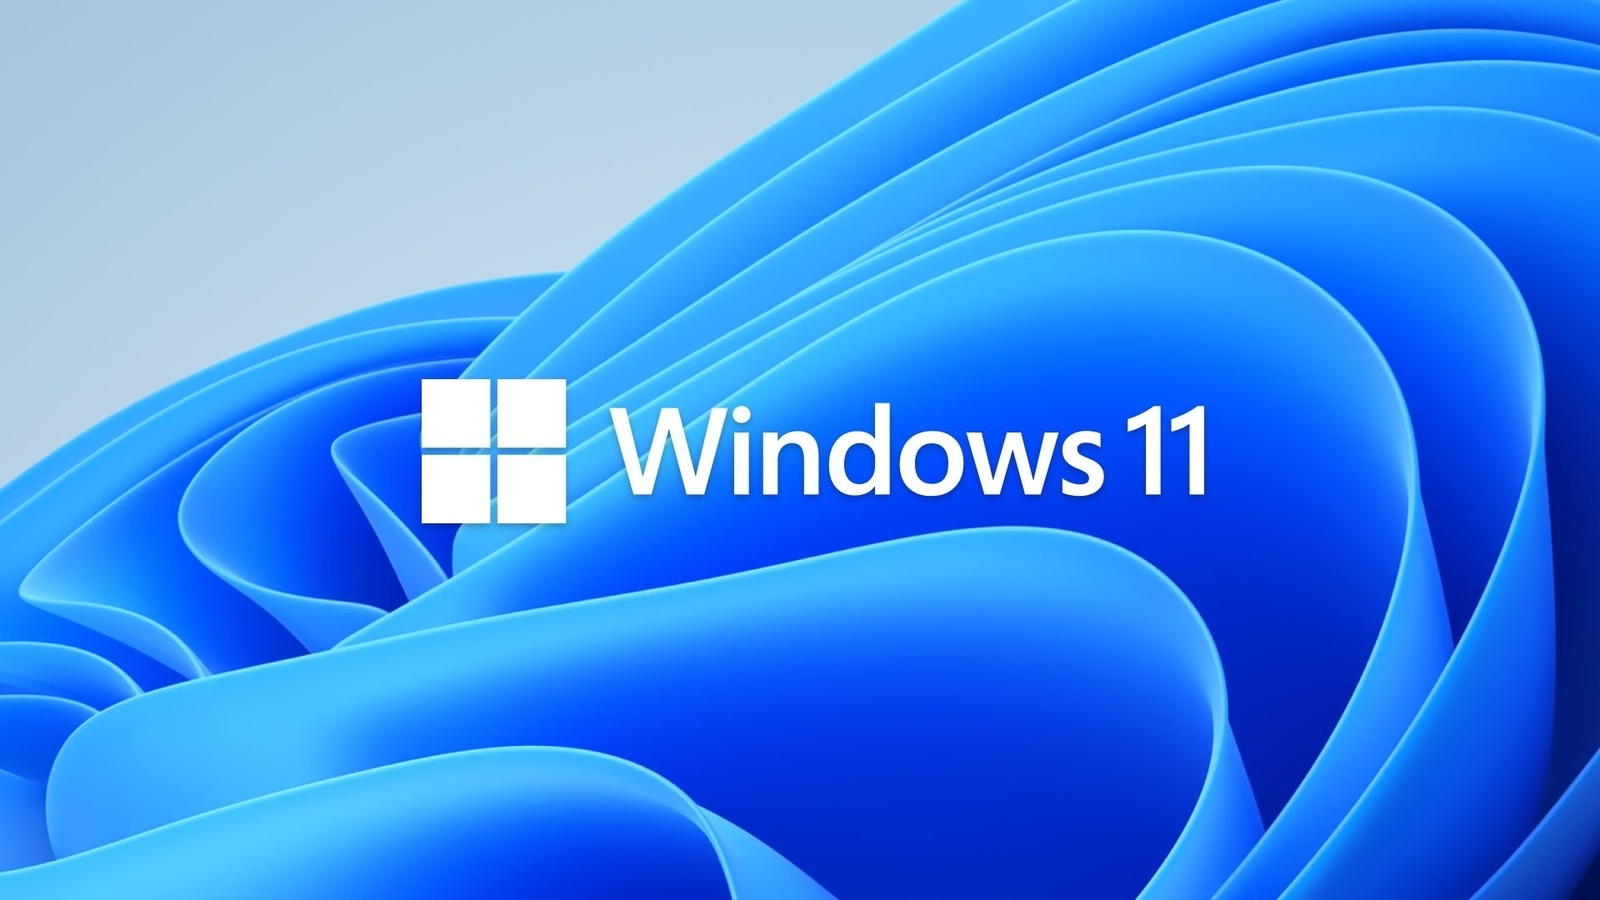 Microsoft Windows 11 Release Date Revealed This Is The Day That The Os Will Launch Report Hints Ht Tech